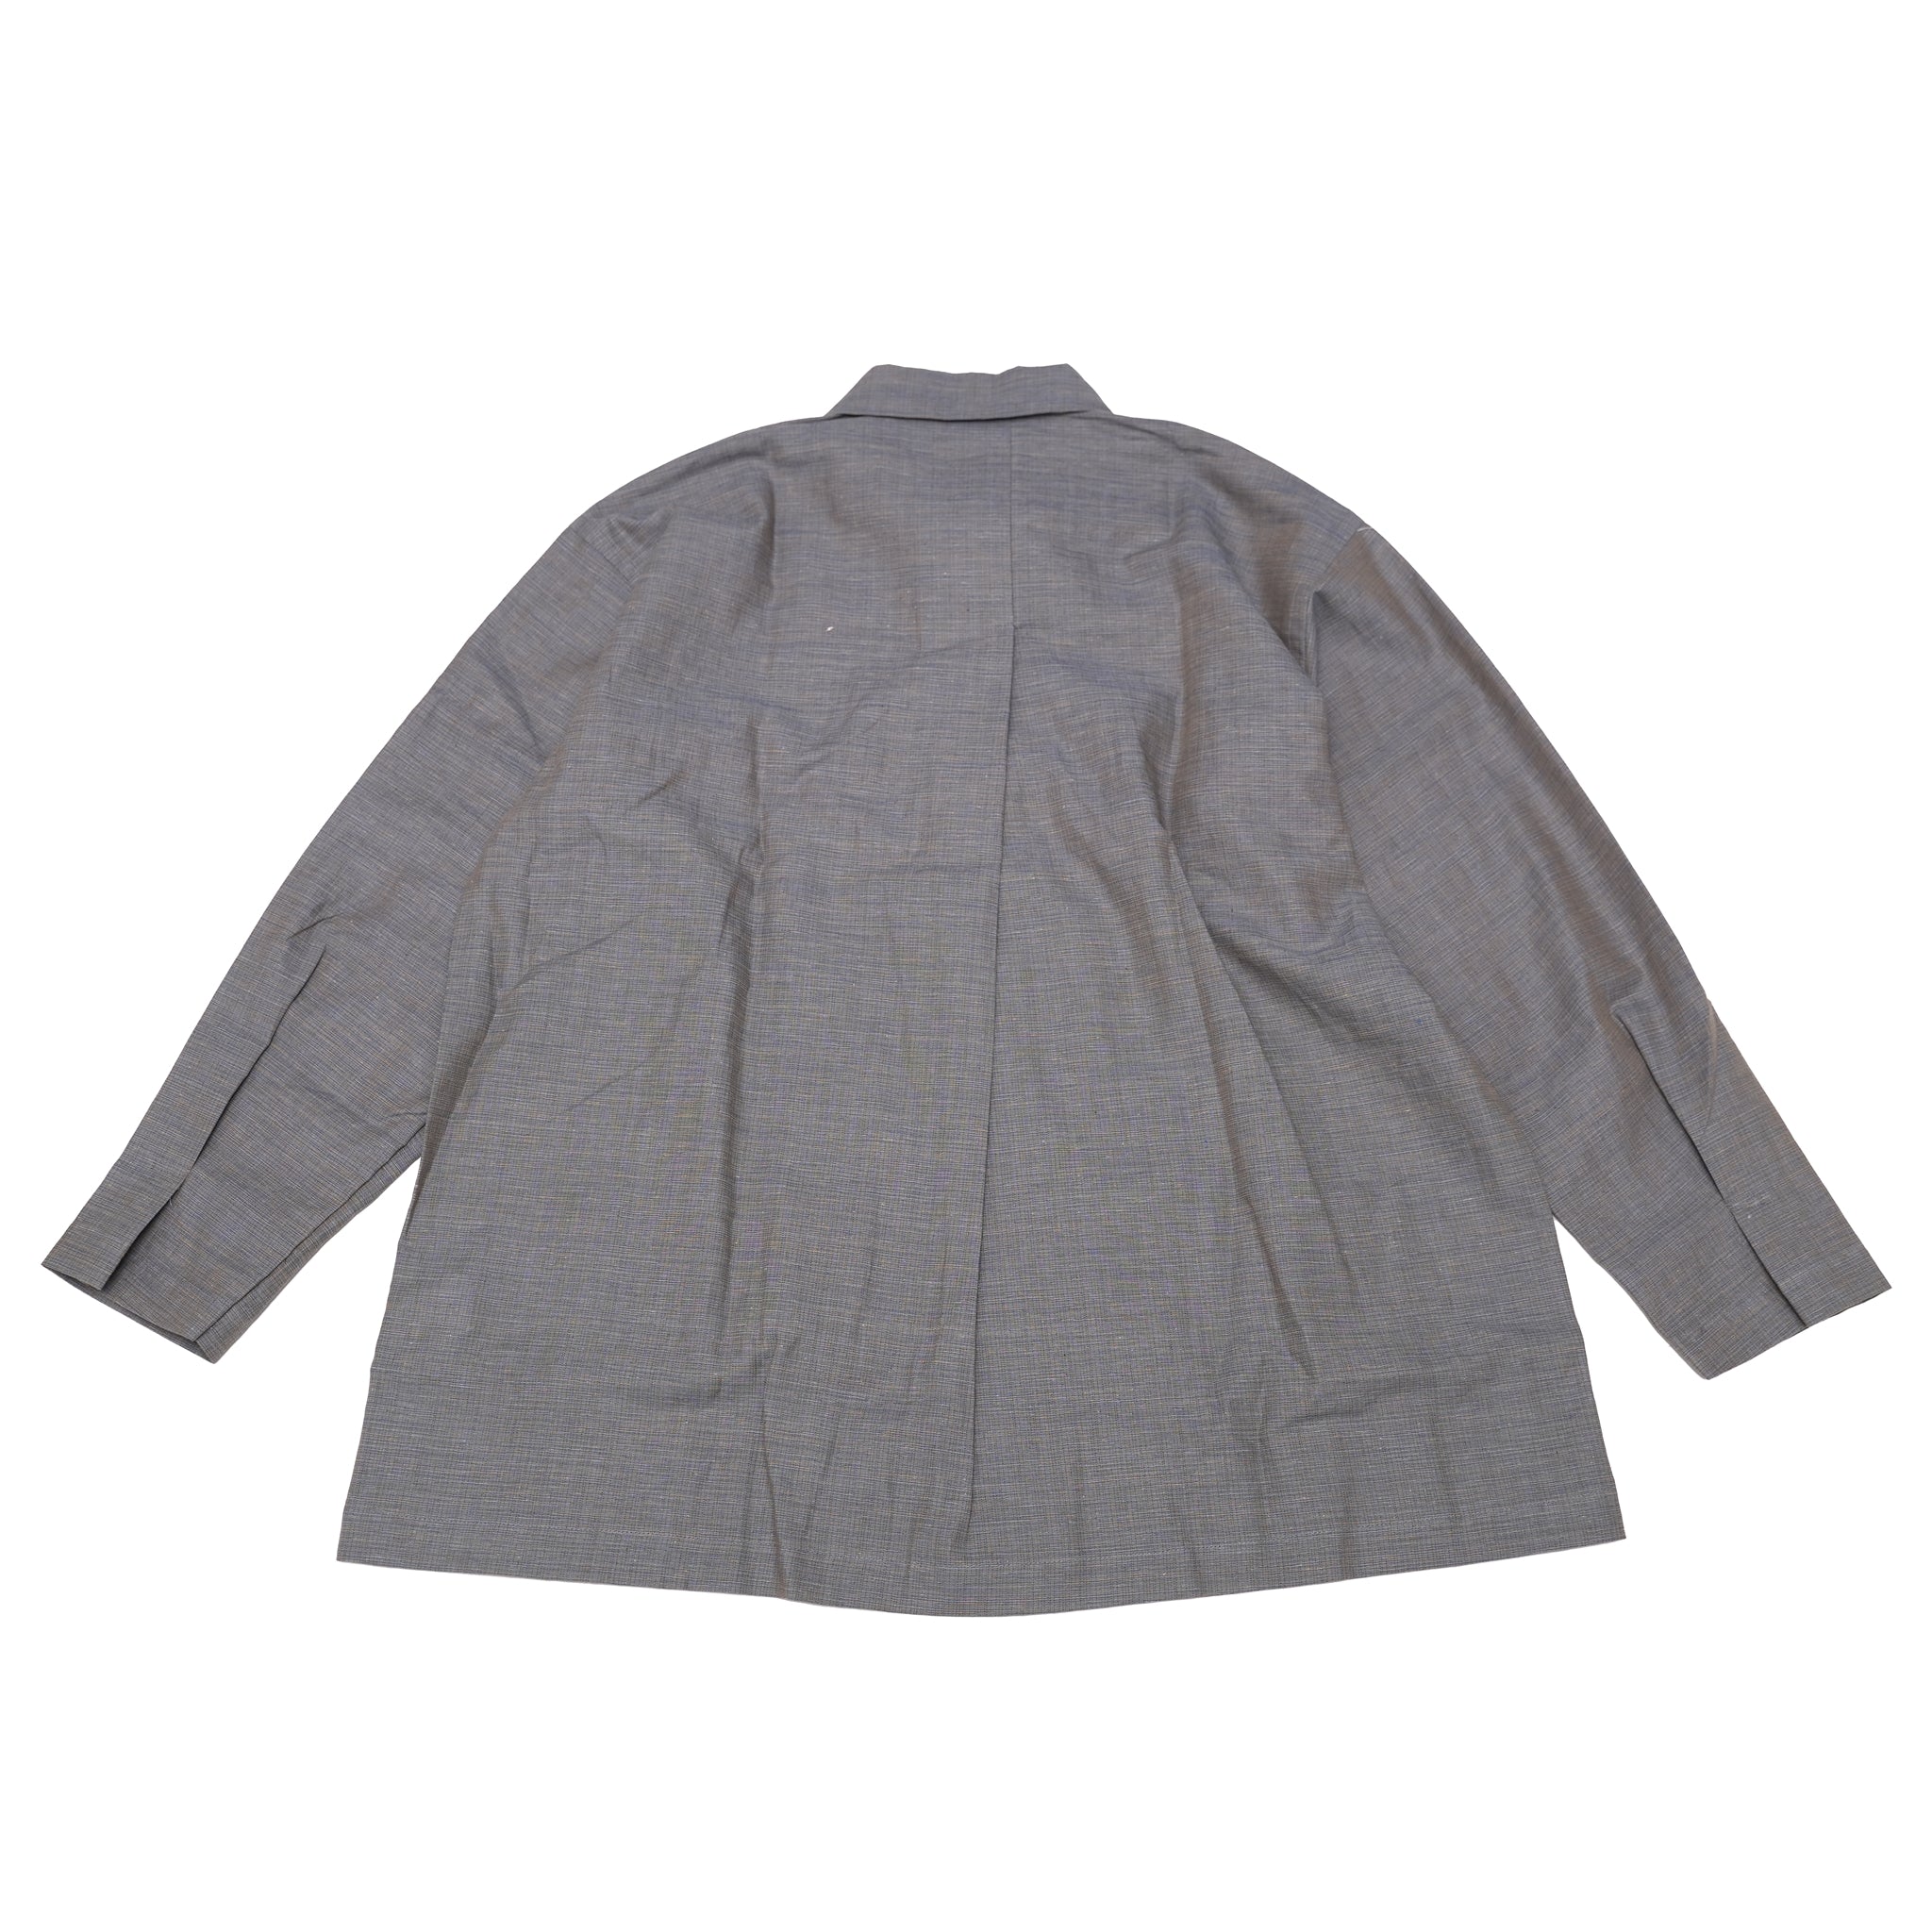 Name:Tropic (Weight) Shirts | Color:BLUE MIX | Size:Free 【CITYLIGHTS PRODUCTS_シティライツプロダクツ】